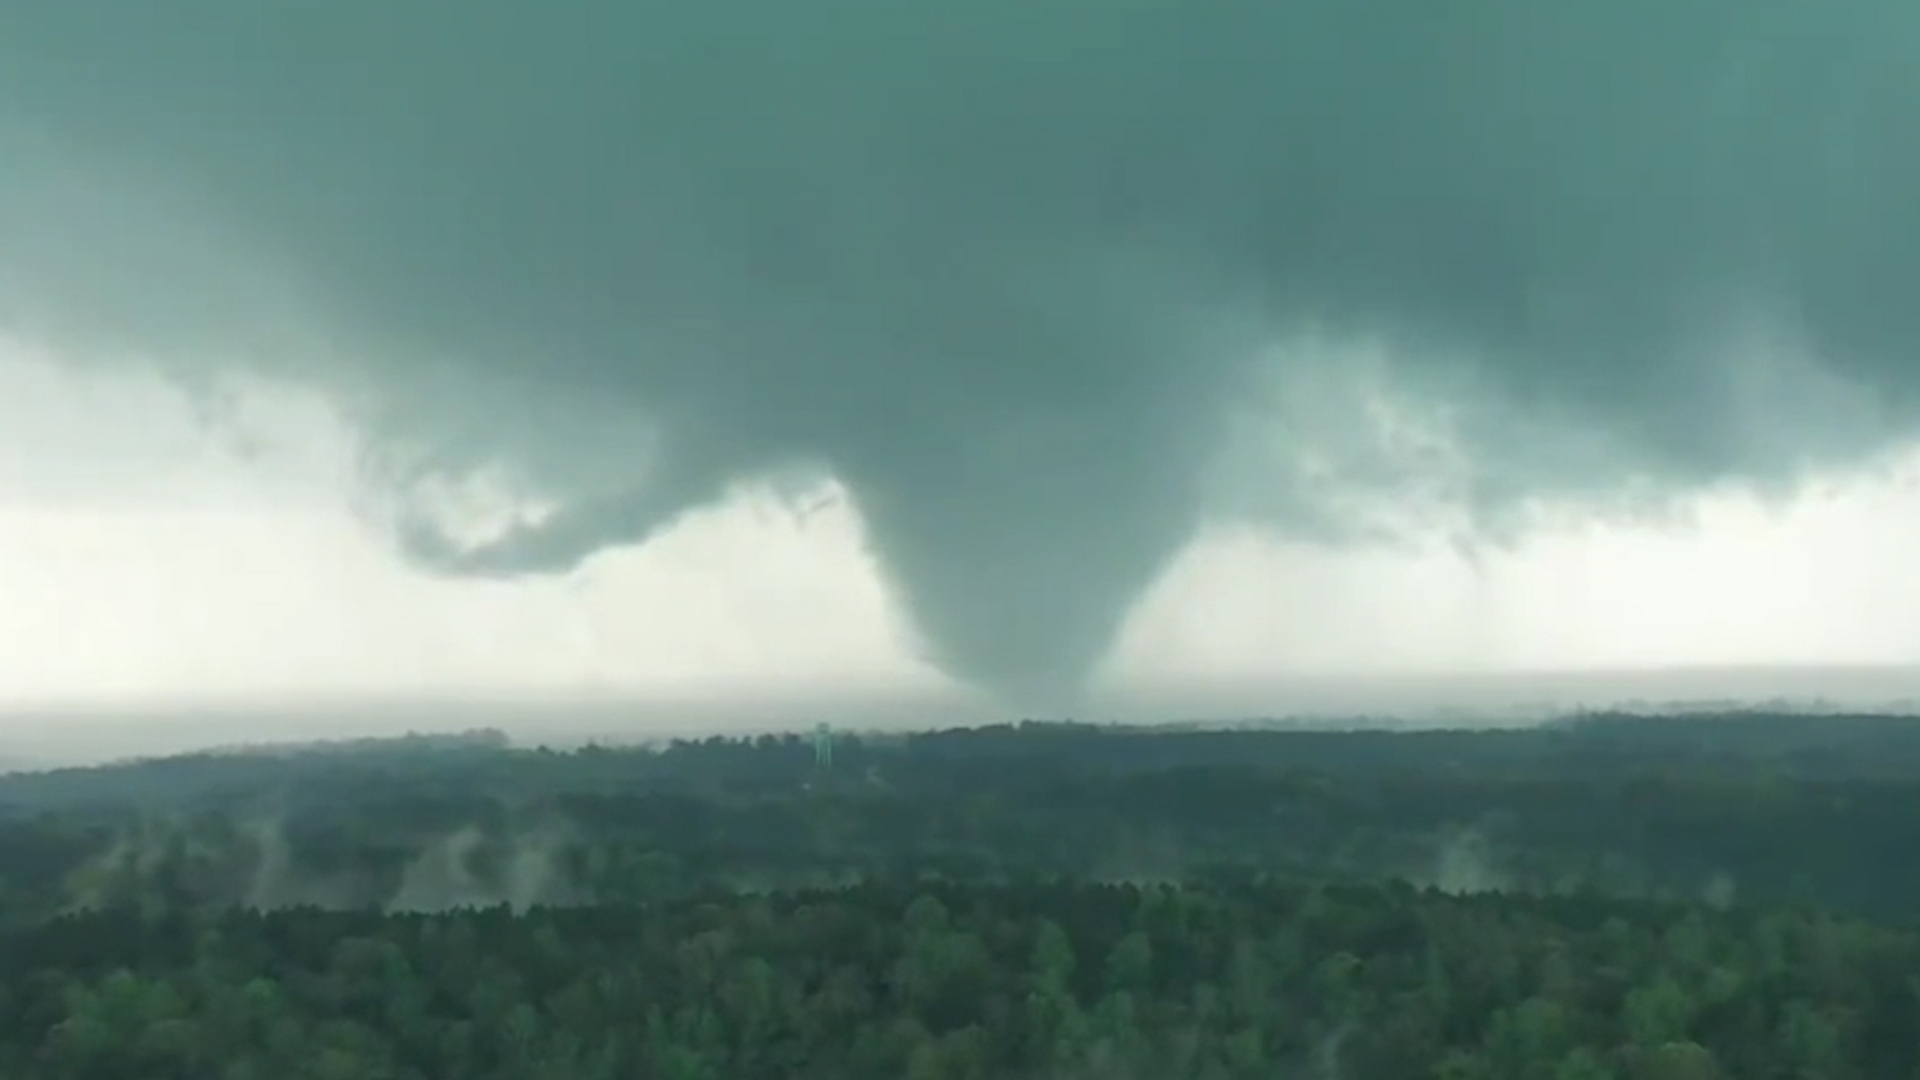 Terrifying moment massive tornado is spotted in Alabama